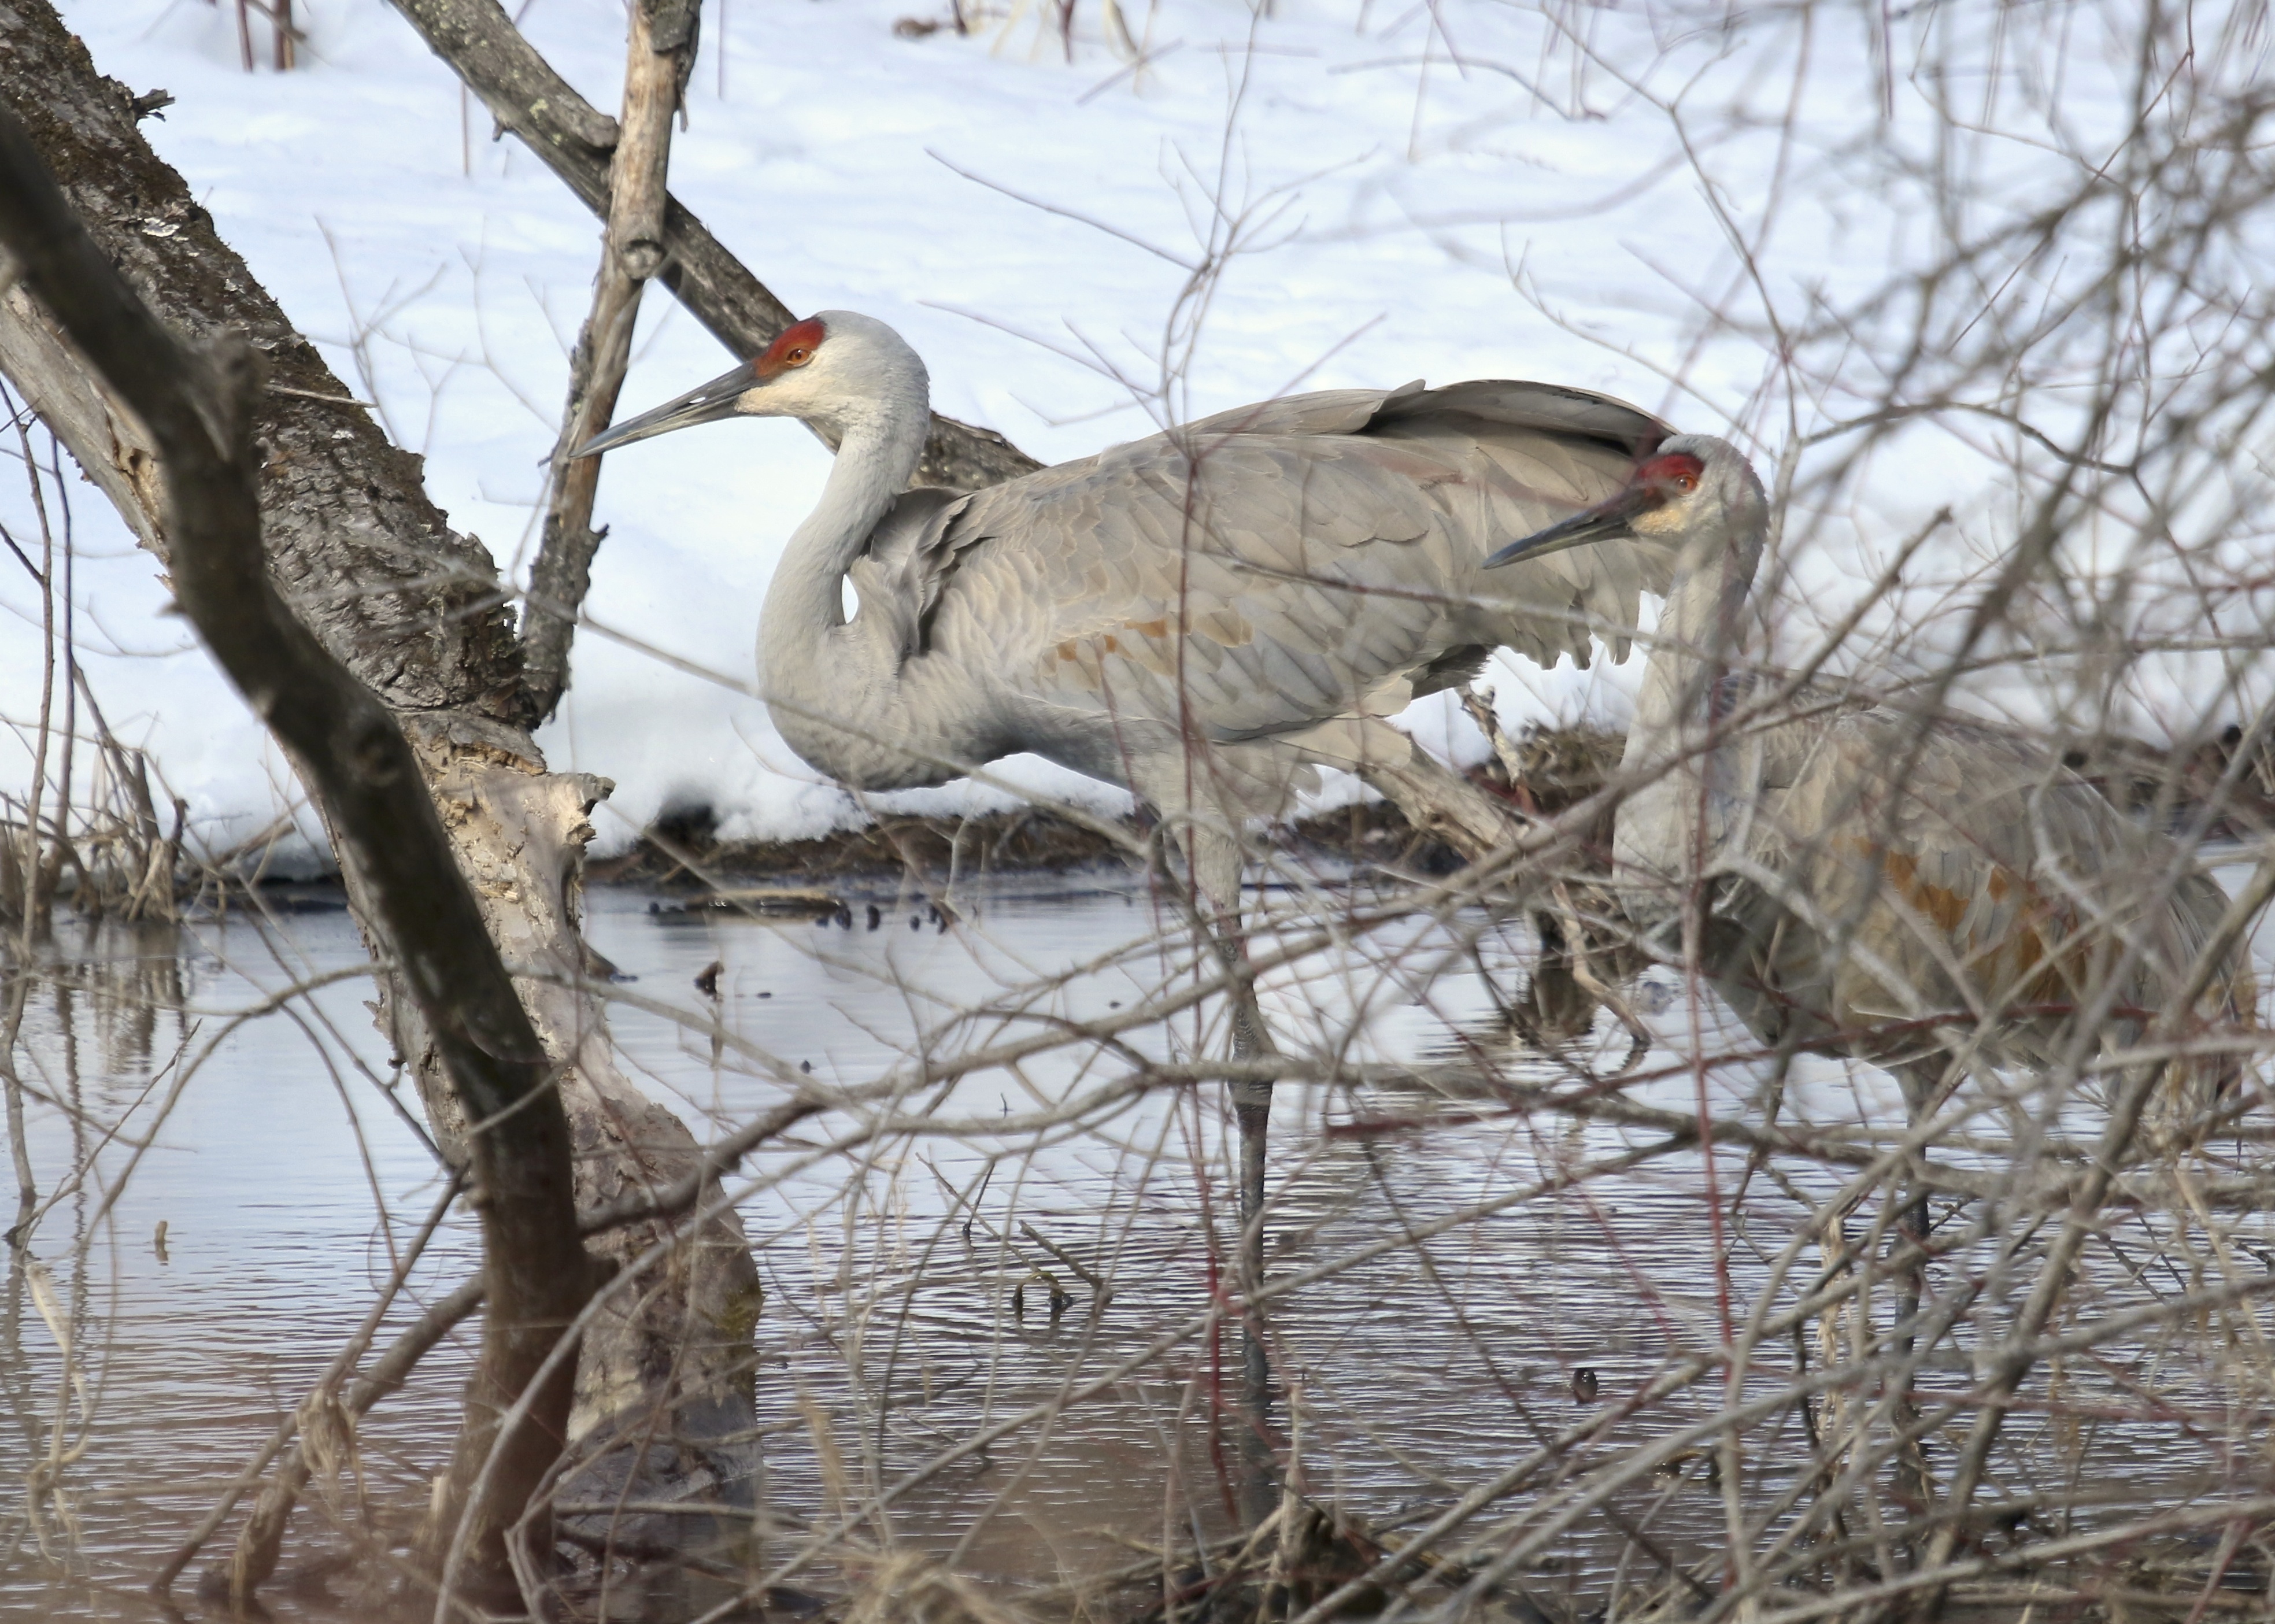 The crane on the right only lifted its head this one time, I was pleased to get a shot with both birds in it. Sandhill Cranes in Ulster Park NY, 2/27/14.